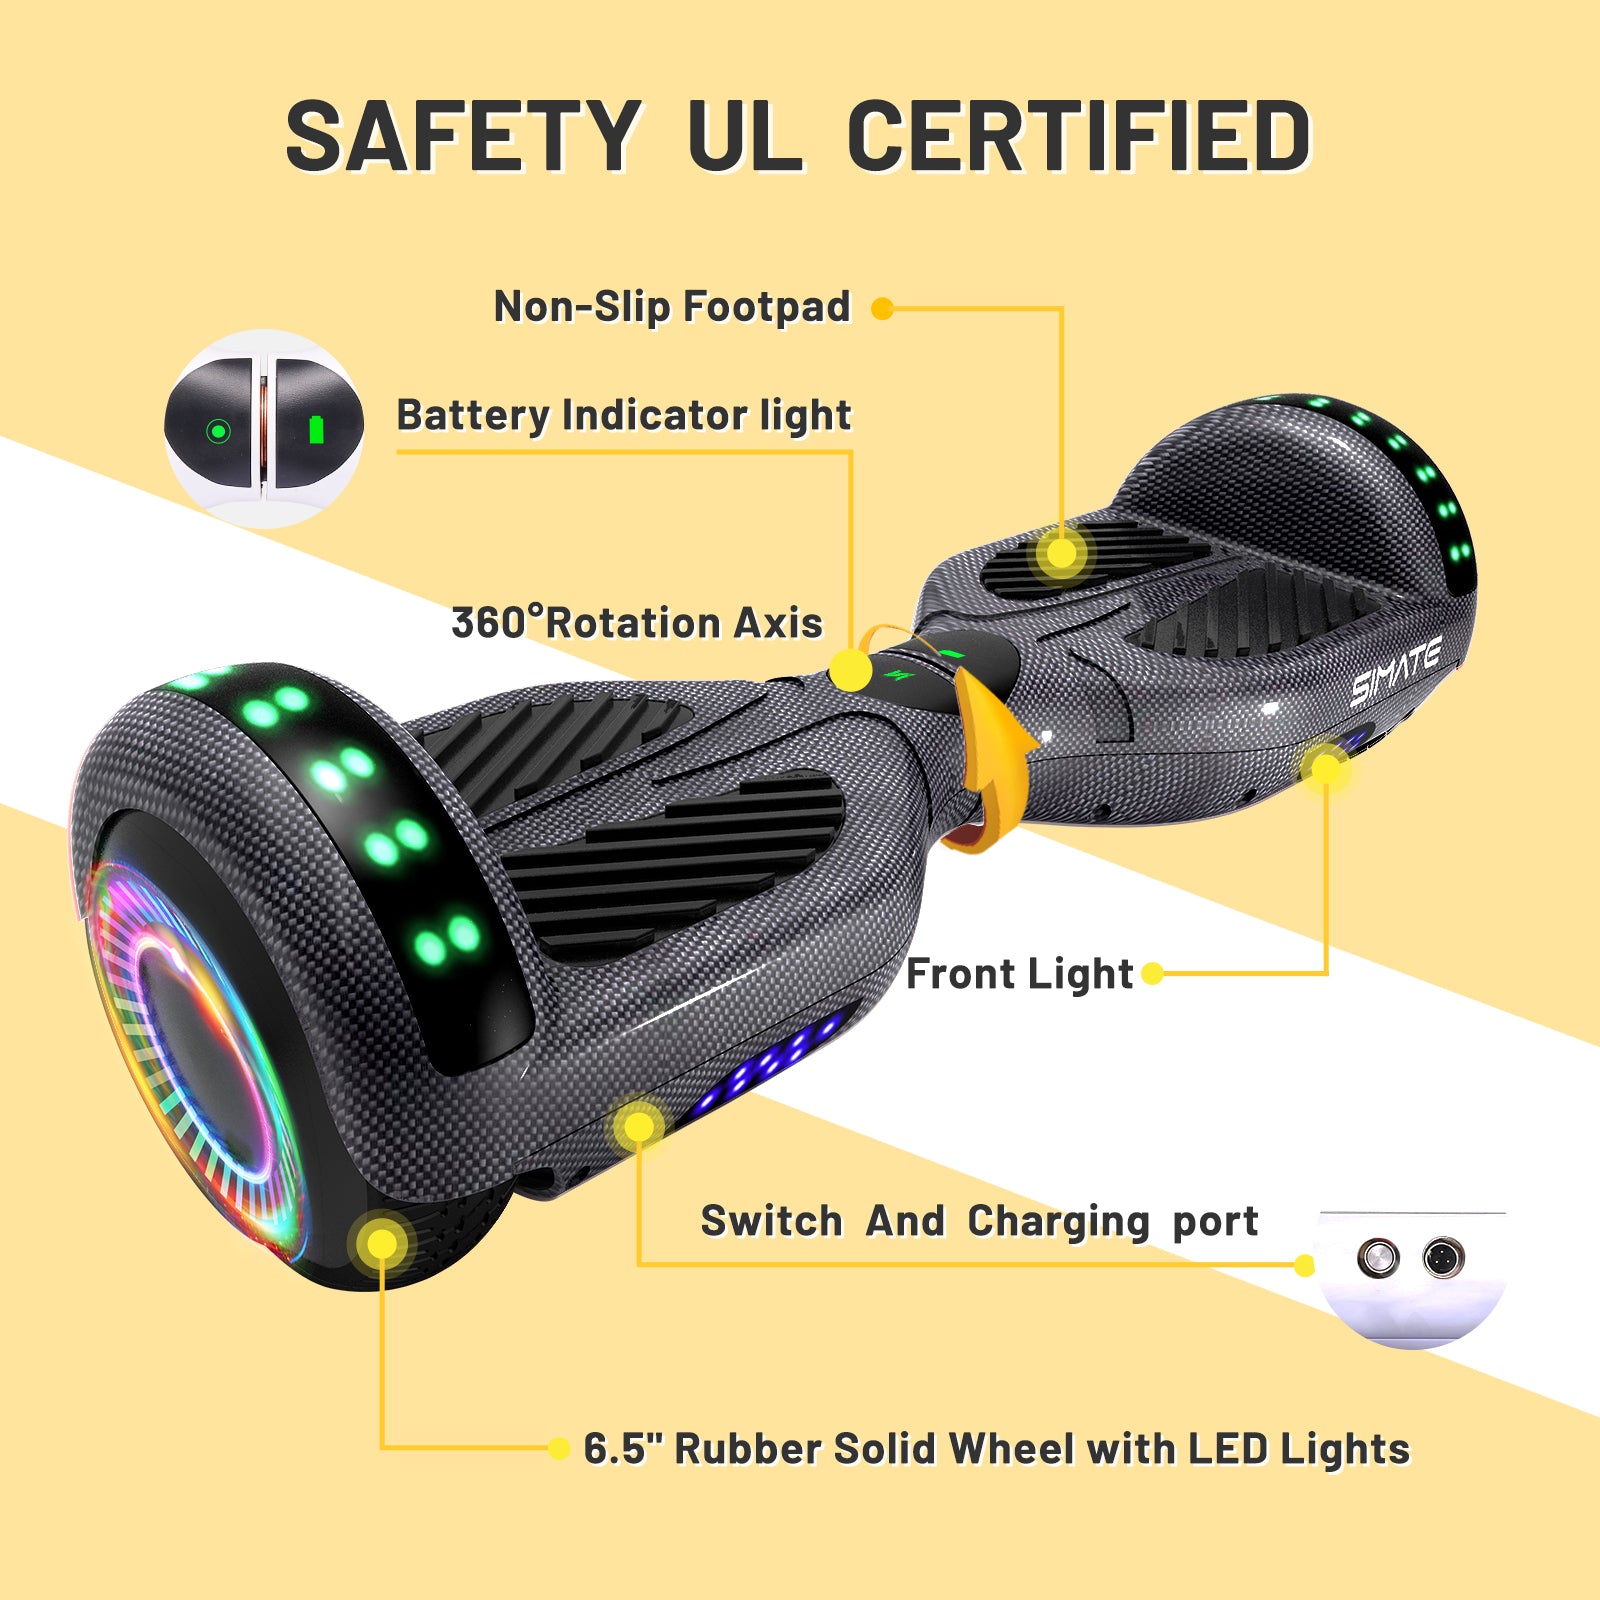 SIMATE Hoverboard 6.5" Self Balancing Electric 7.5MPH Top Speed 8 Mile Range Hover Board with Bluetooth Speakers and LED Lights for Kids Adults Girls Boys Gifts